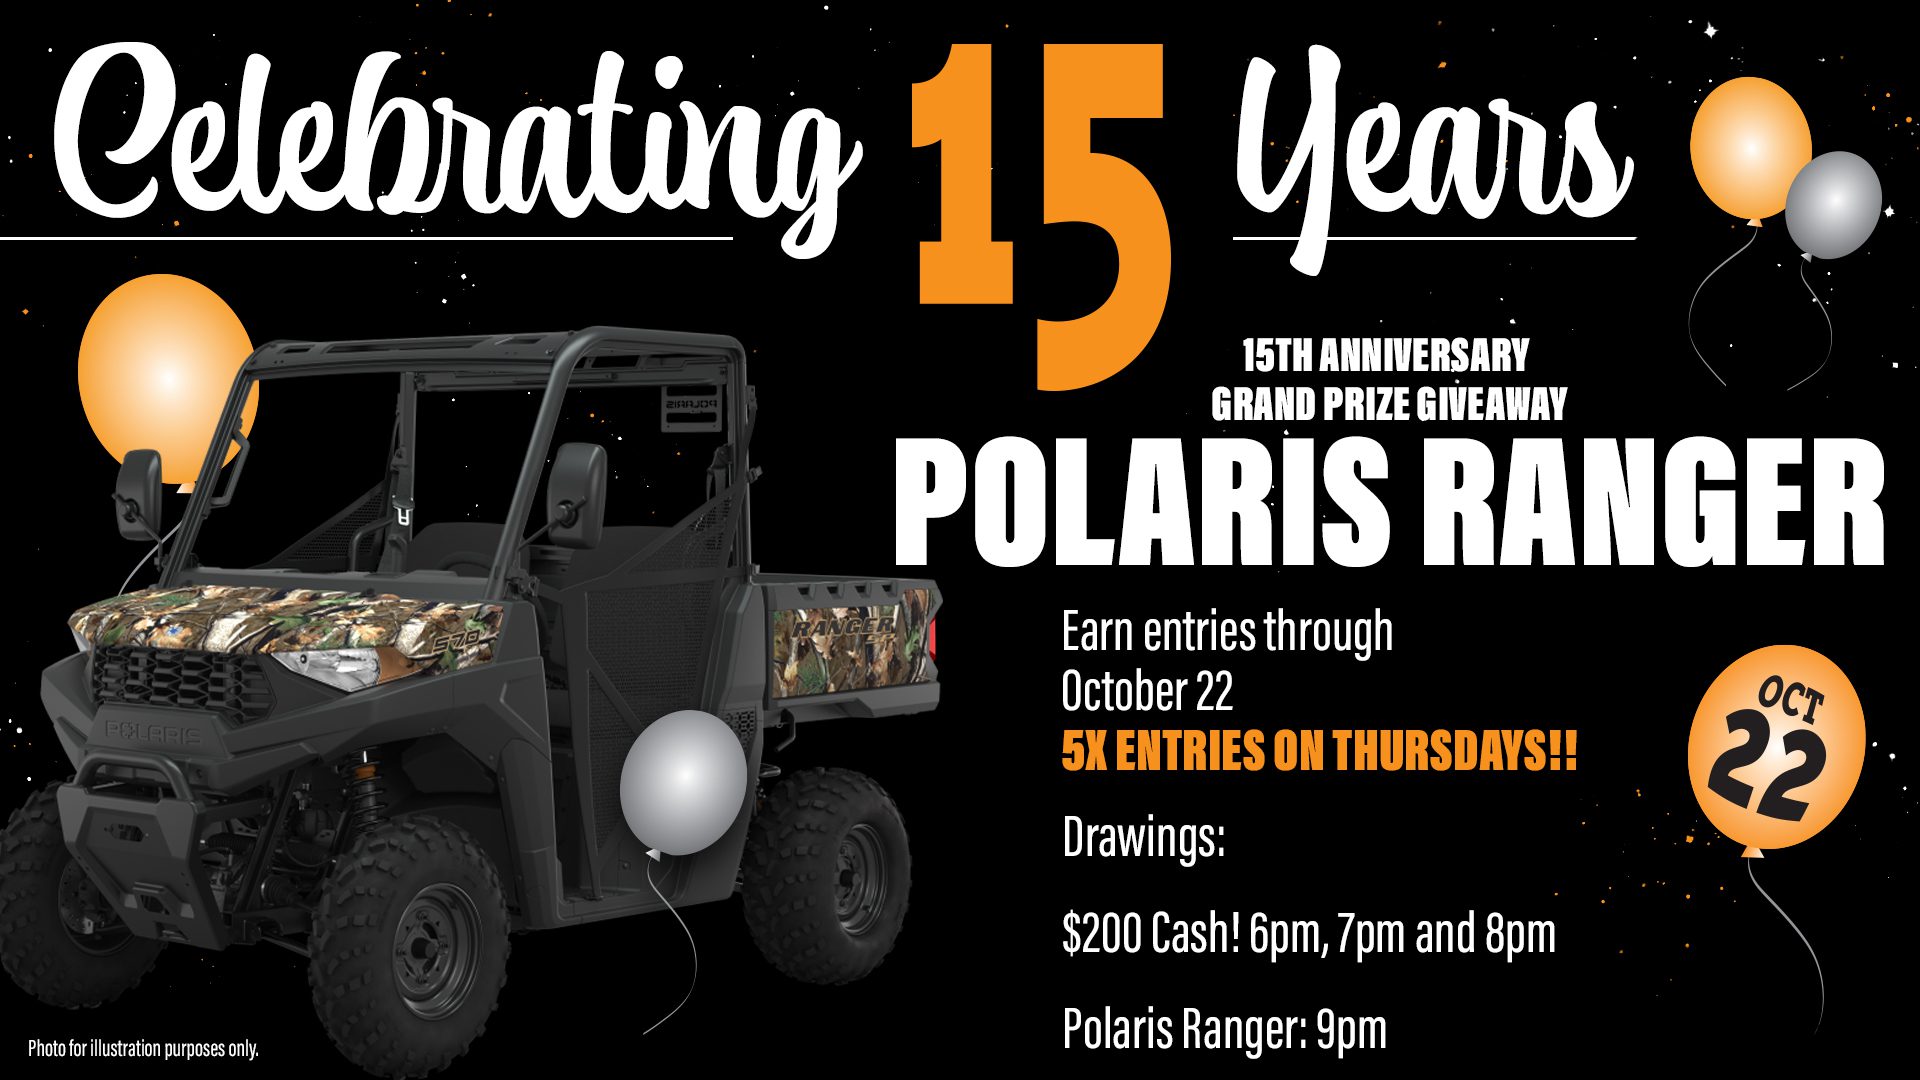 15th anniversary giveaway event featuring a polaris ranger with balloons and dates for prize drawings.